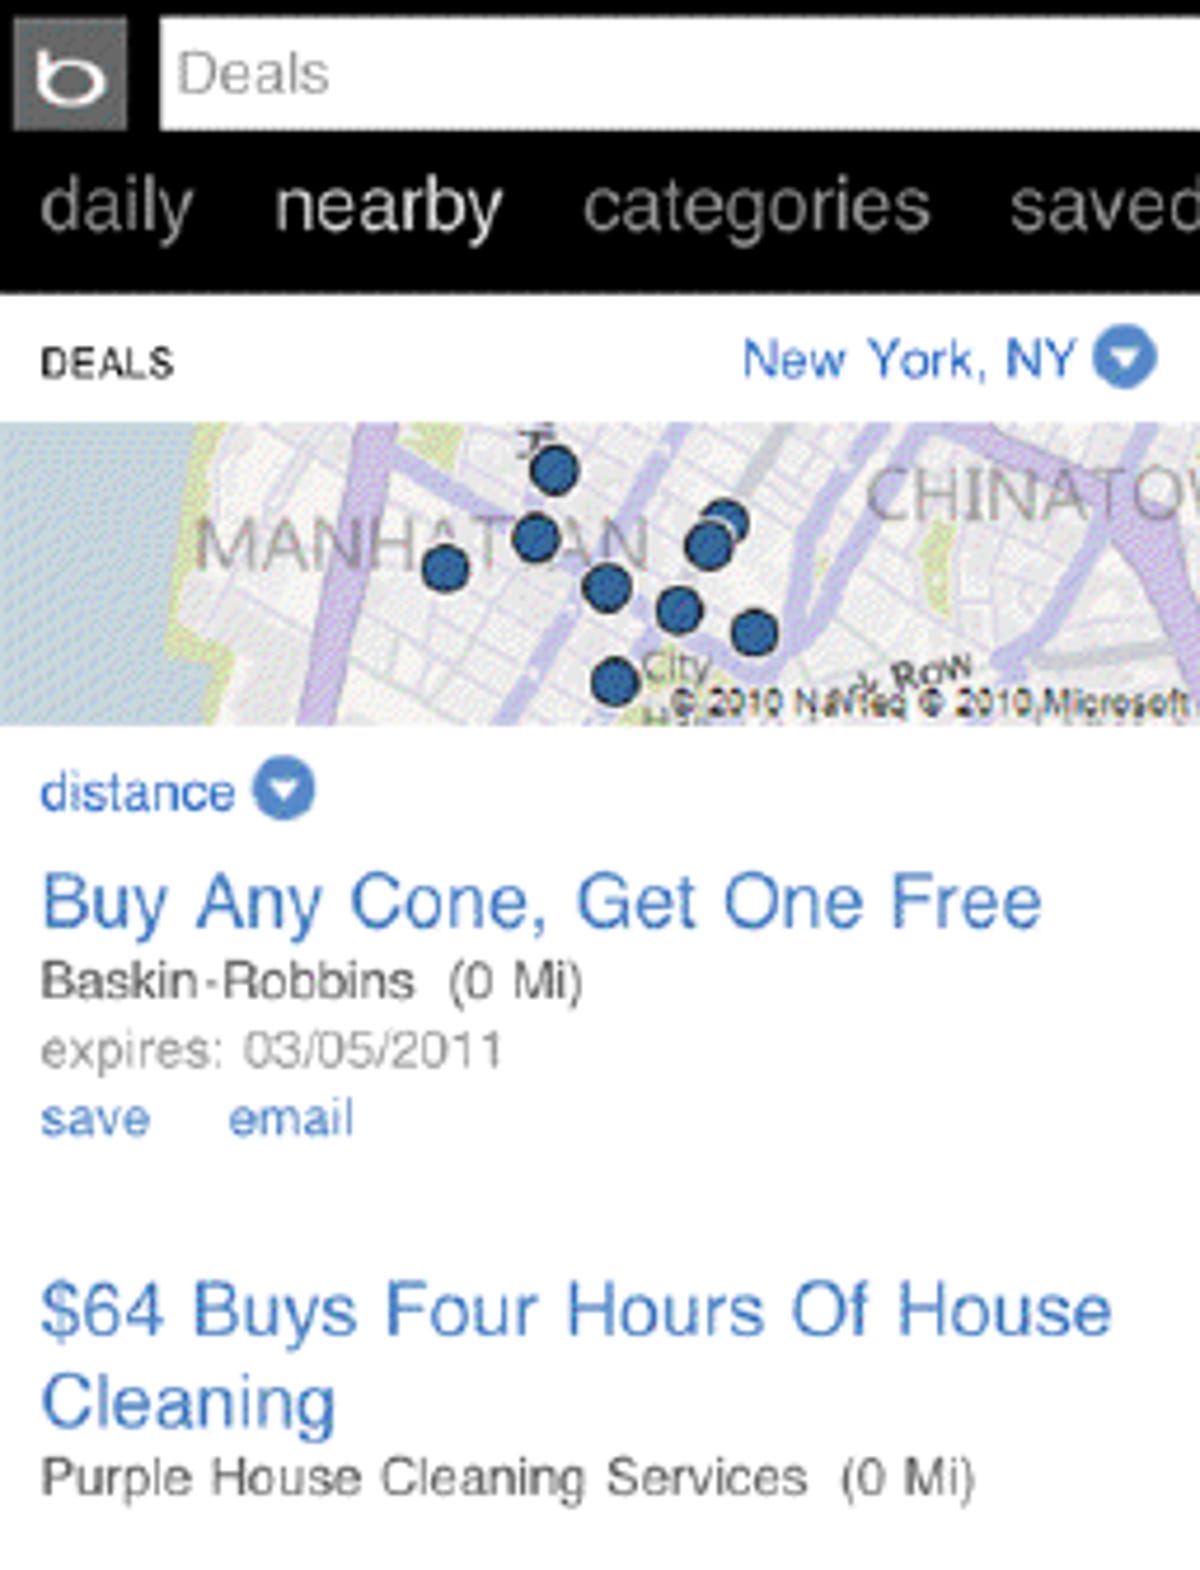 Bing's new deal finder can narrow down its list of deals by user location, taken from a mobile phone.